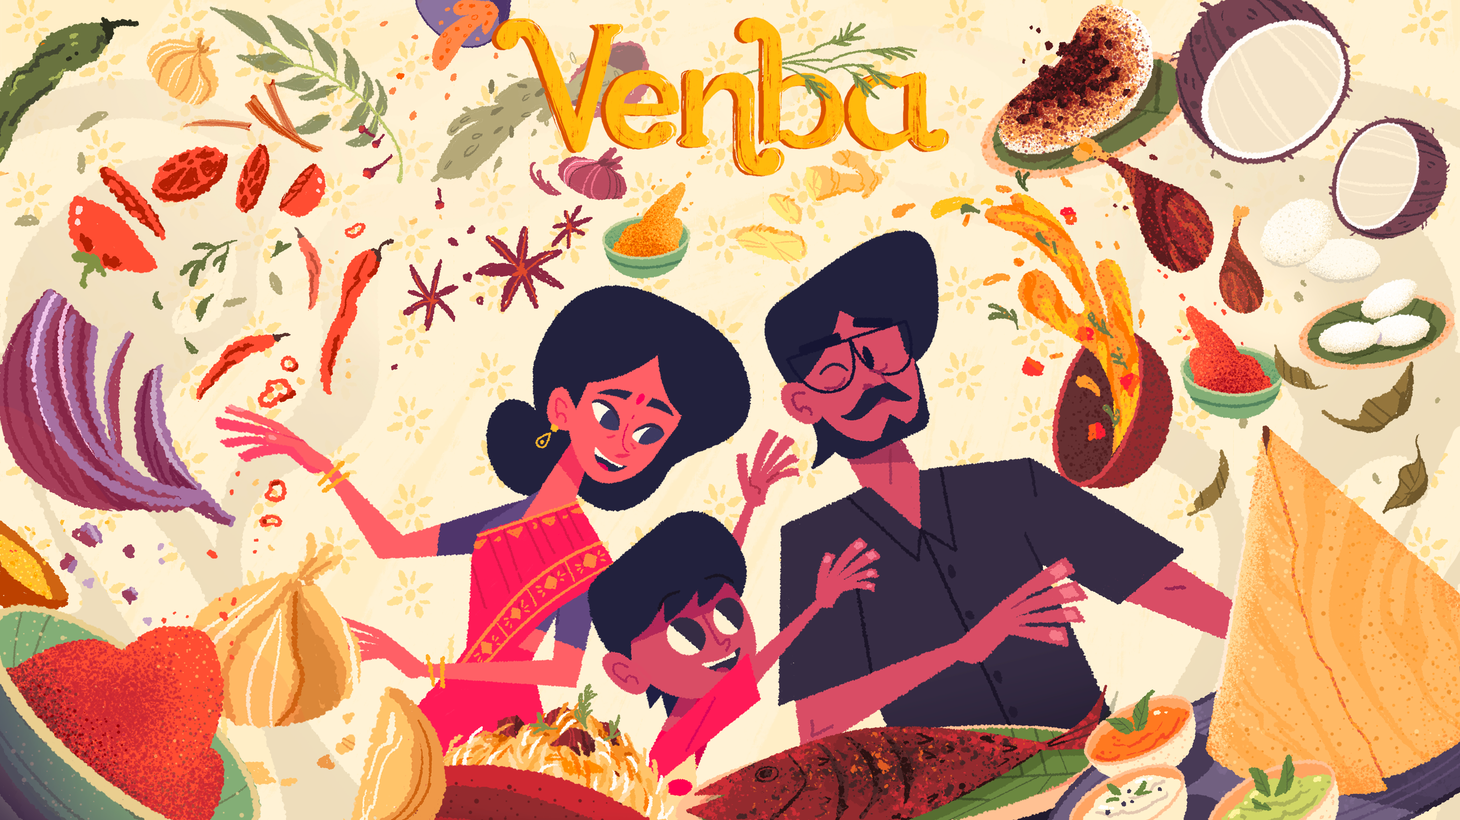 Venba focuses on South Indian cuisine and recipes that have narrative significance.